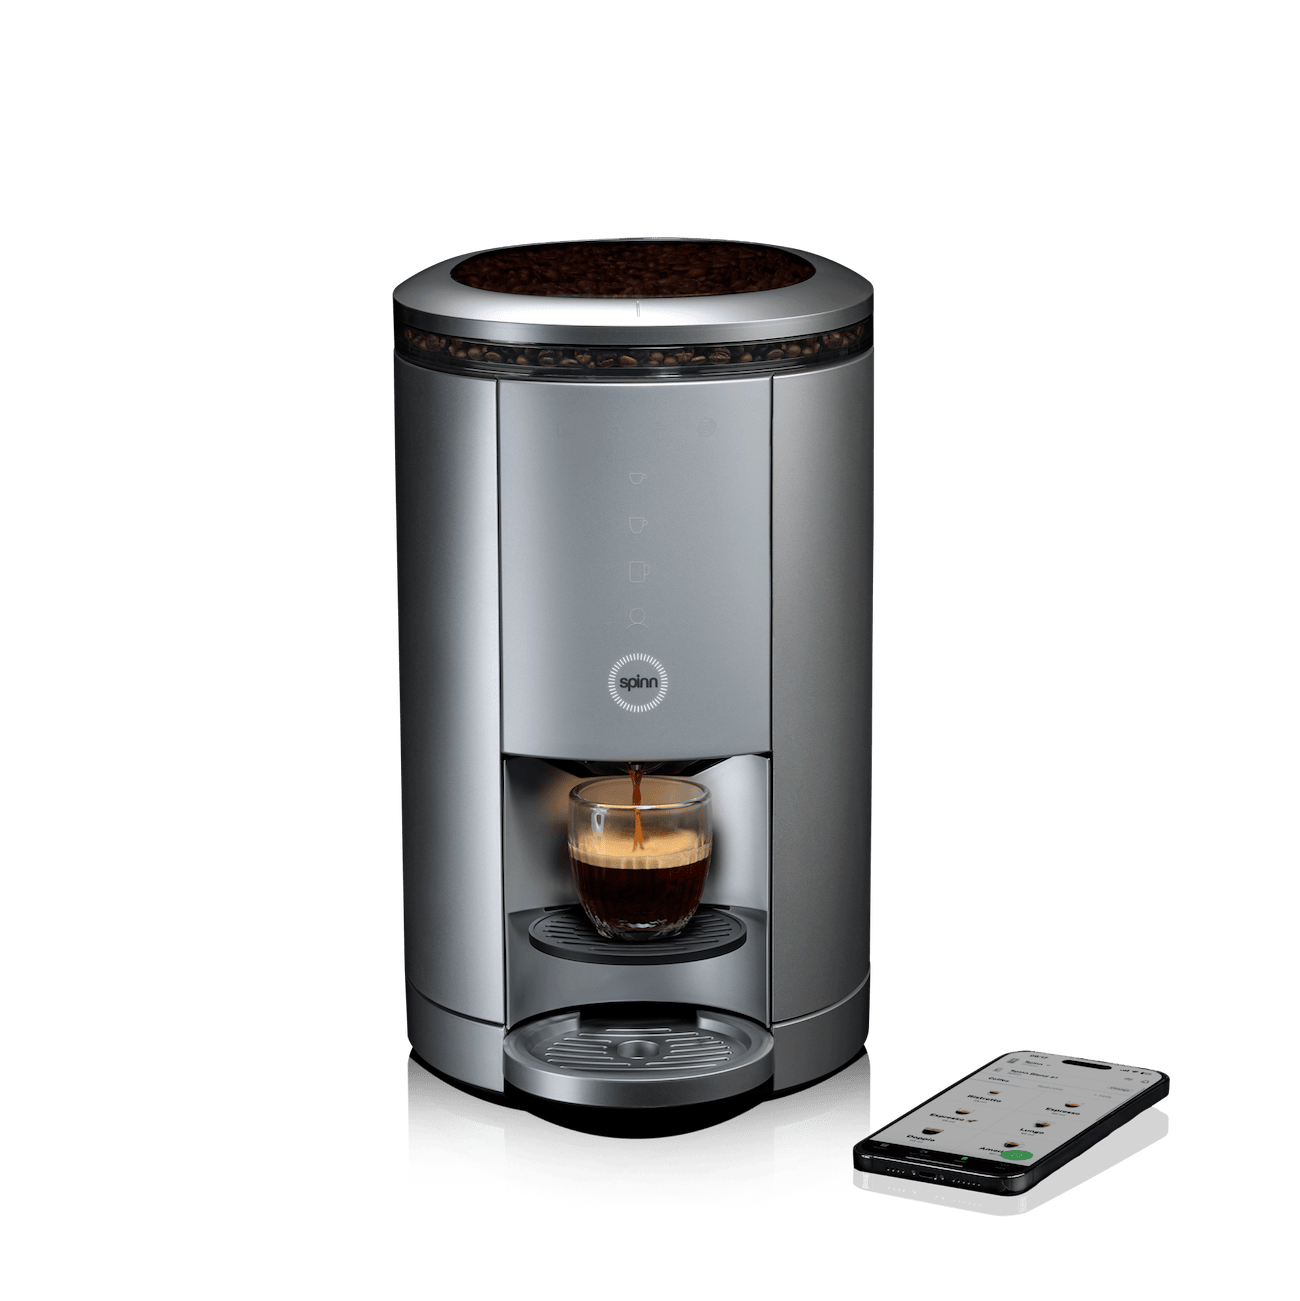  SPINN Espresso & Coffee Machine, Smart WiFi Automatic Coffee  Maker, Cold Brew & Espresso Machine Combo with Programmable Centrifugal  Brewing & Grinder, Water Supply Line Compatible, No Refills, Silver: Home 